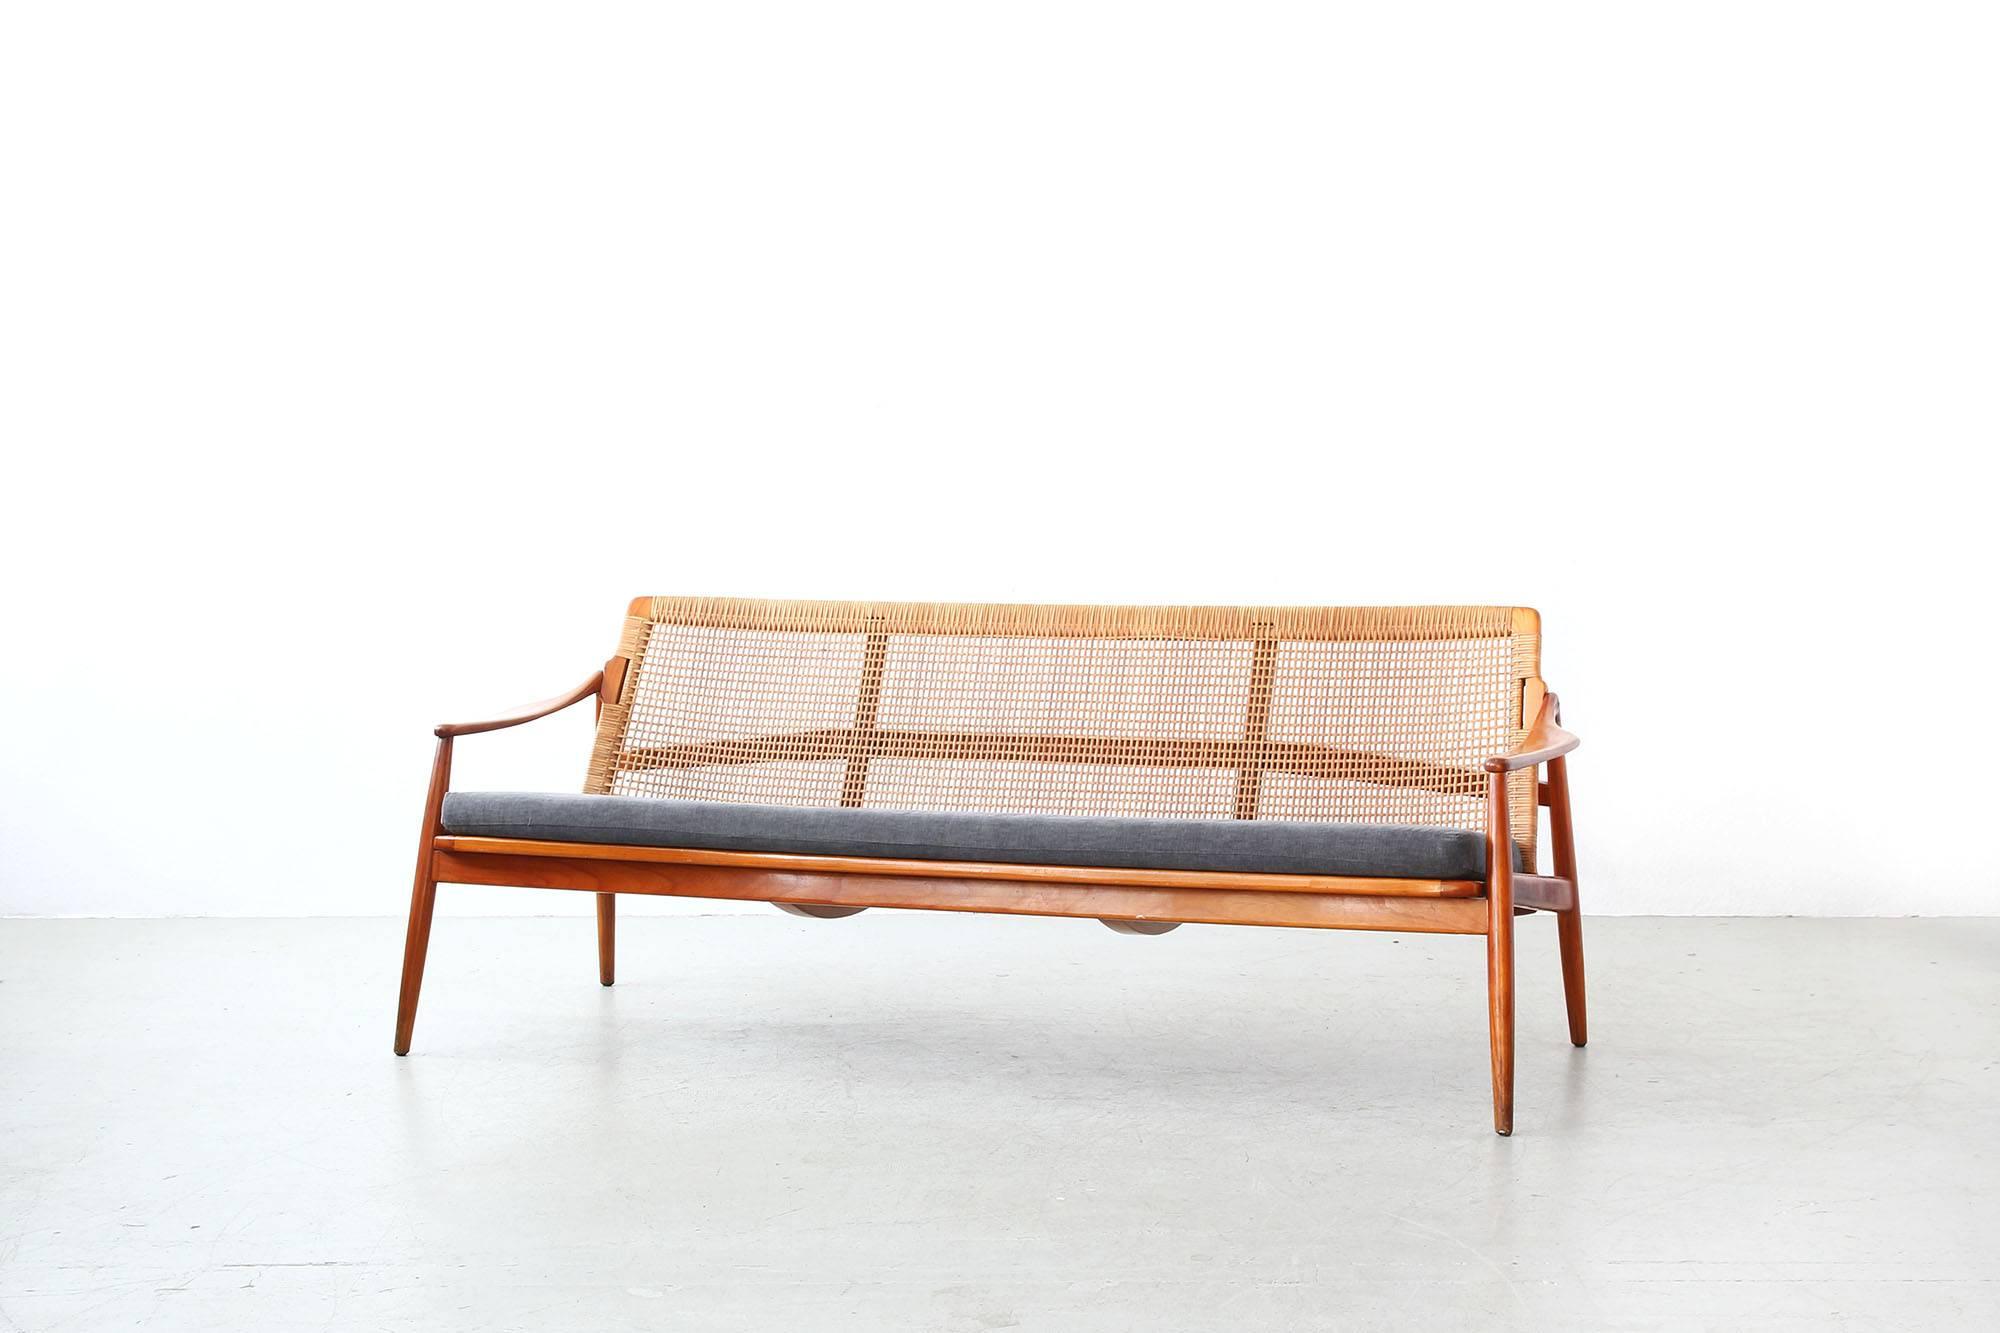 Beautiful sofa by Hartmut Lohmeyer for Wilkhahn, designed in the 1950s.
The sofa is in an excellent condition with just little signs of use. The cane on the back is without any damages. The cushions were newly reupholstered with a high quality